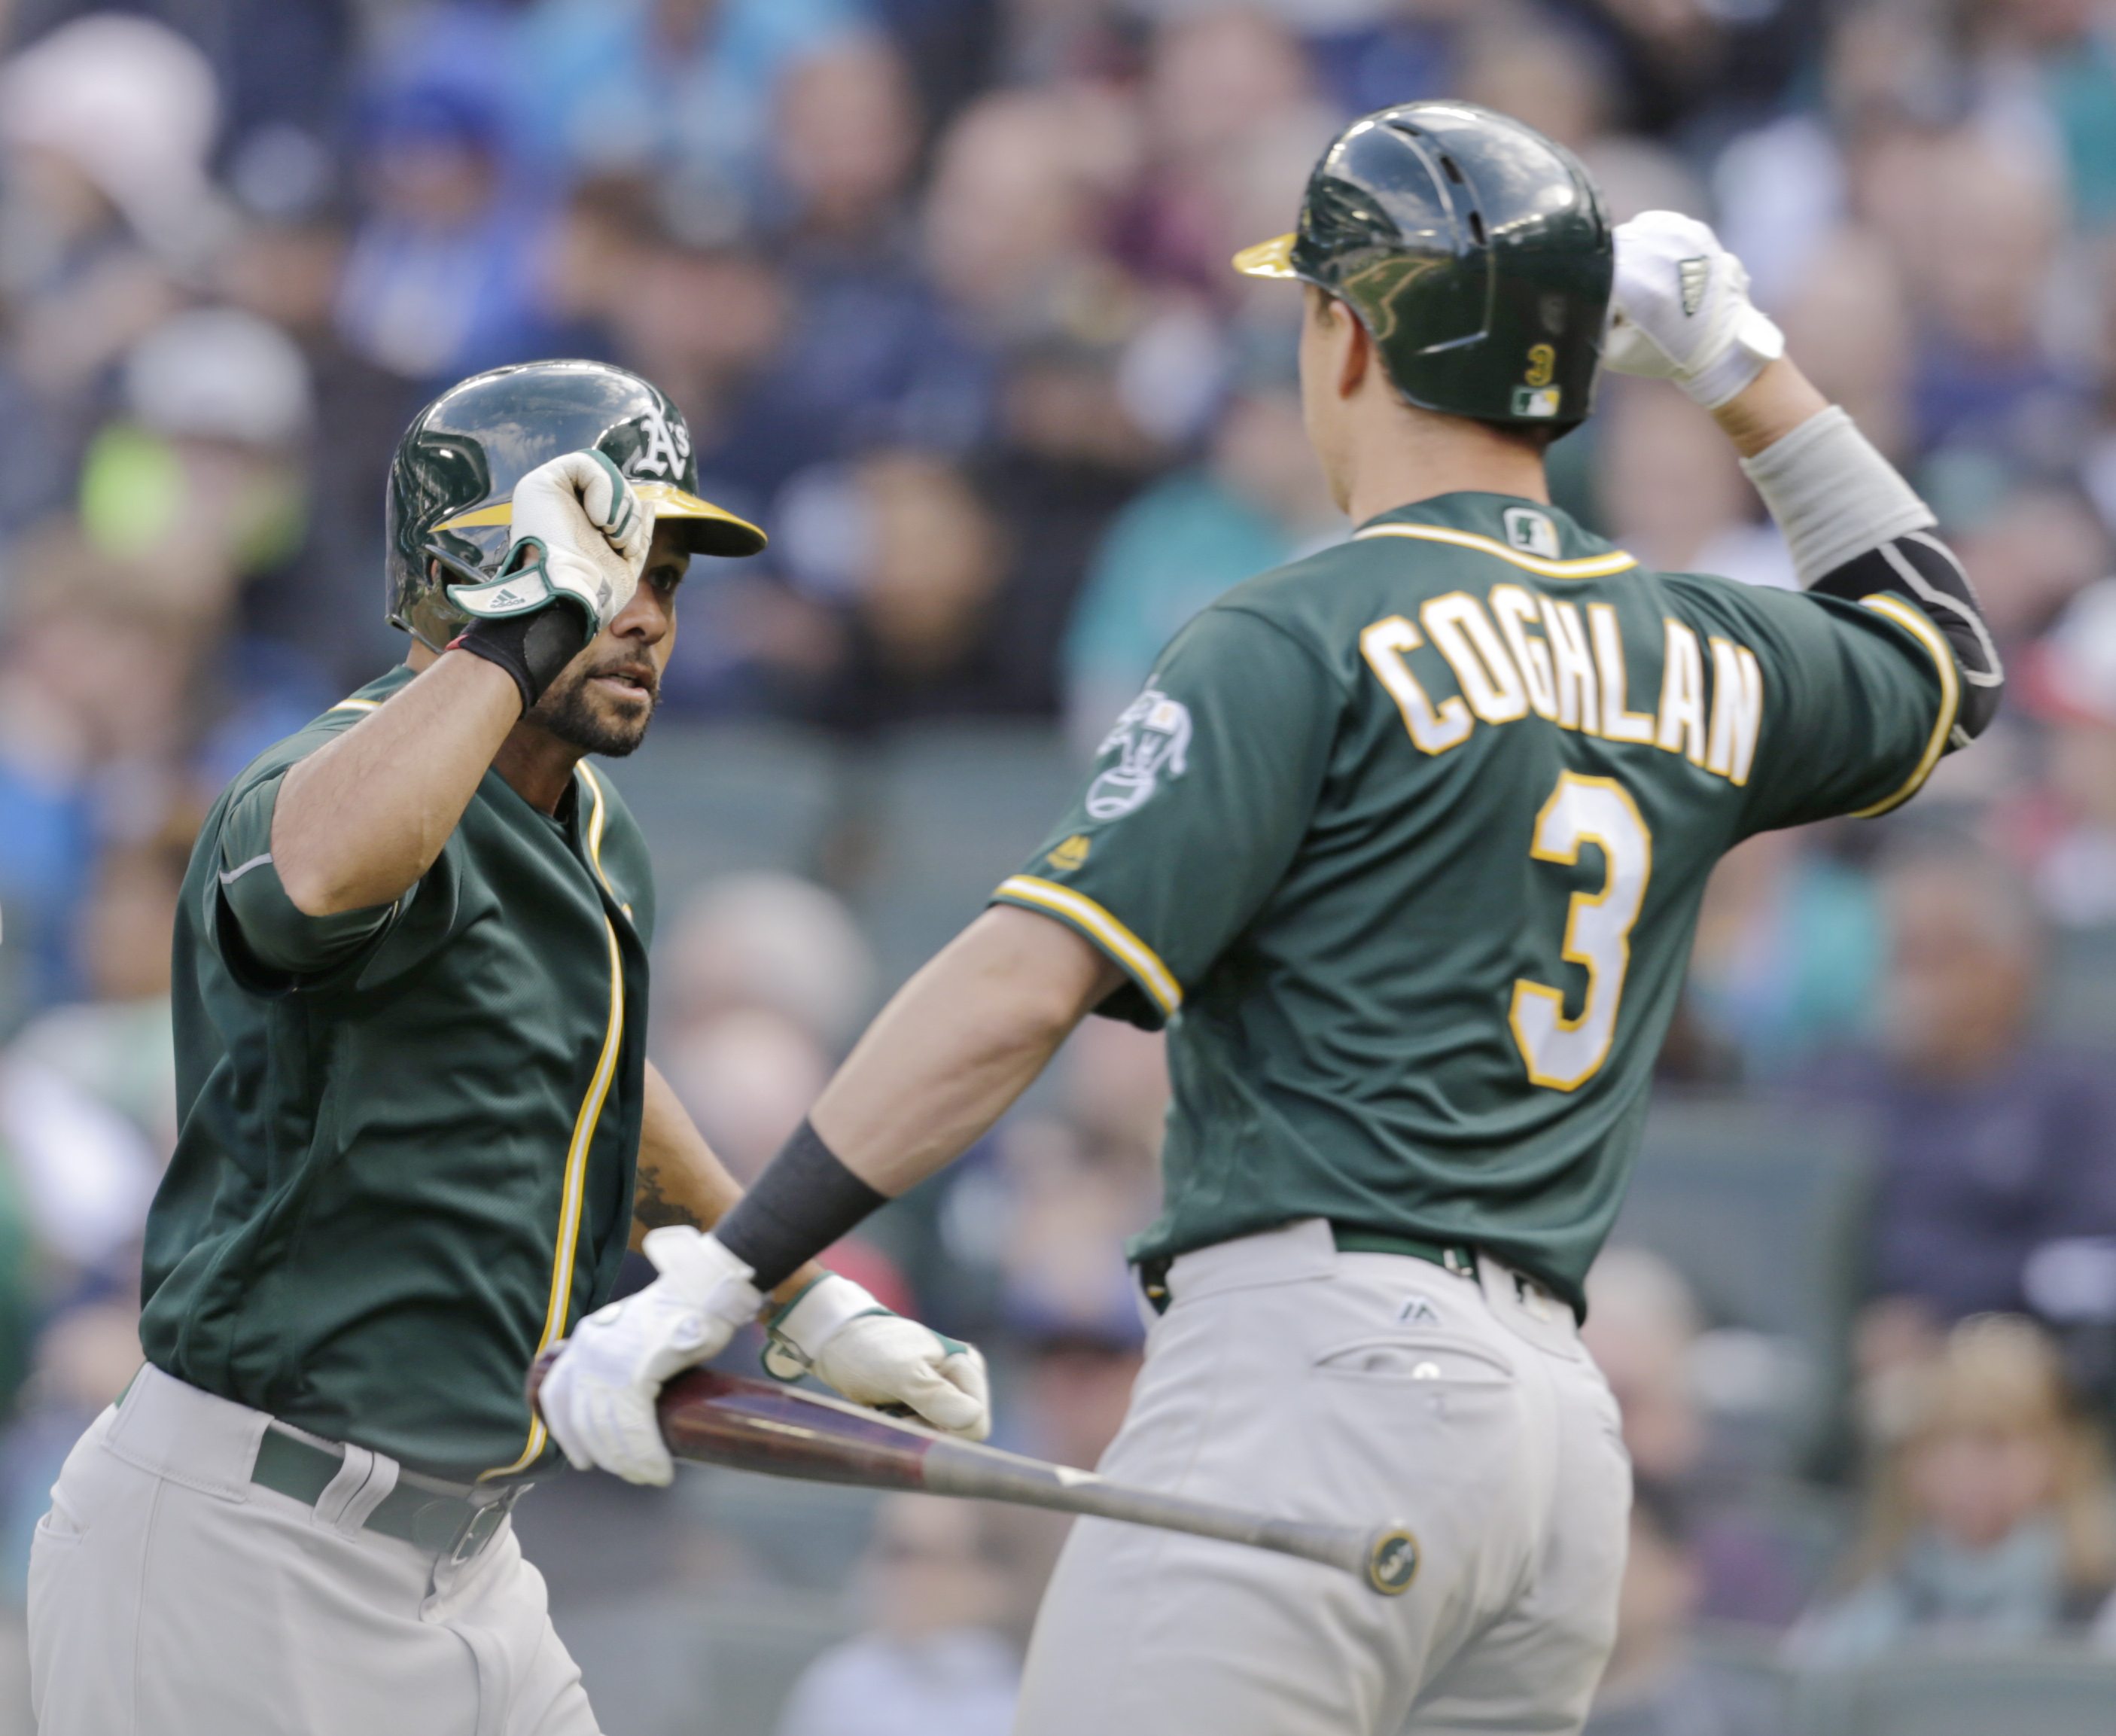 Oakland Athletics' Coco Crisp, left, is congratulated at home by Chris Coghlan after hitting a solo home run on a pitch from Seattle Mariners' Nick Vincent during the 10th inning of a baseball game, Sunday, April 10, 2016, in Seattle. The Athletics won 2-1.